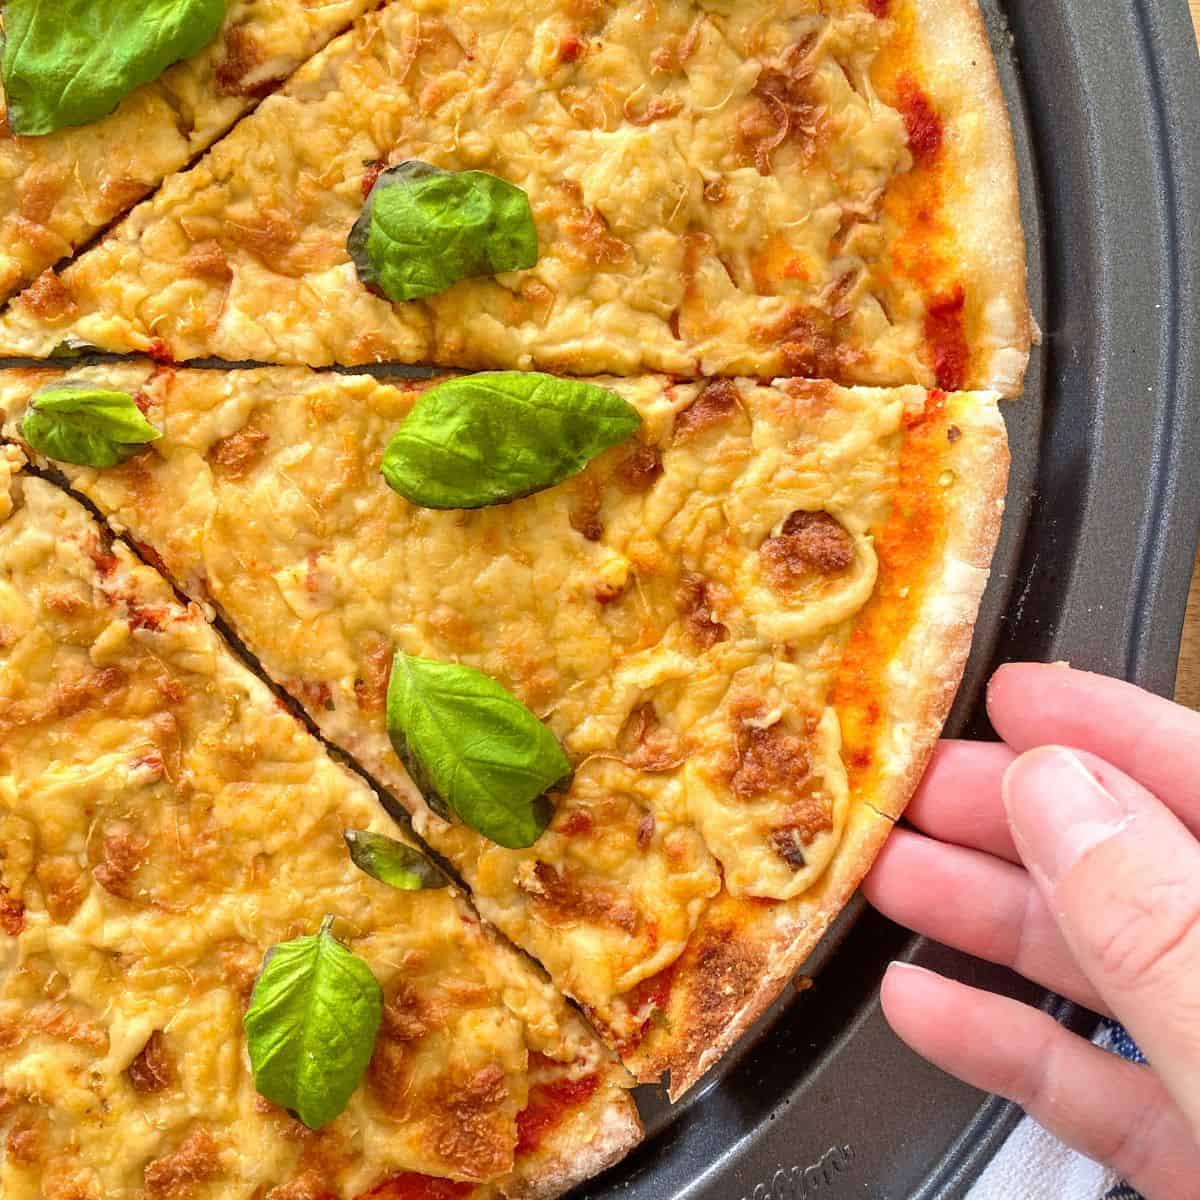 Hand reaching for slice of cheese pizza from pan.